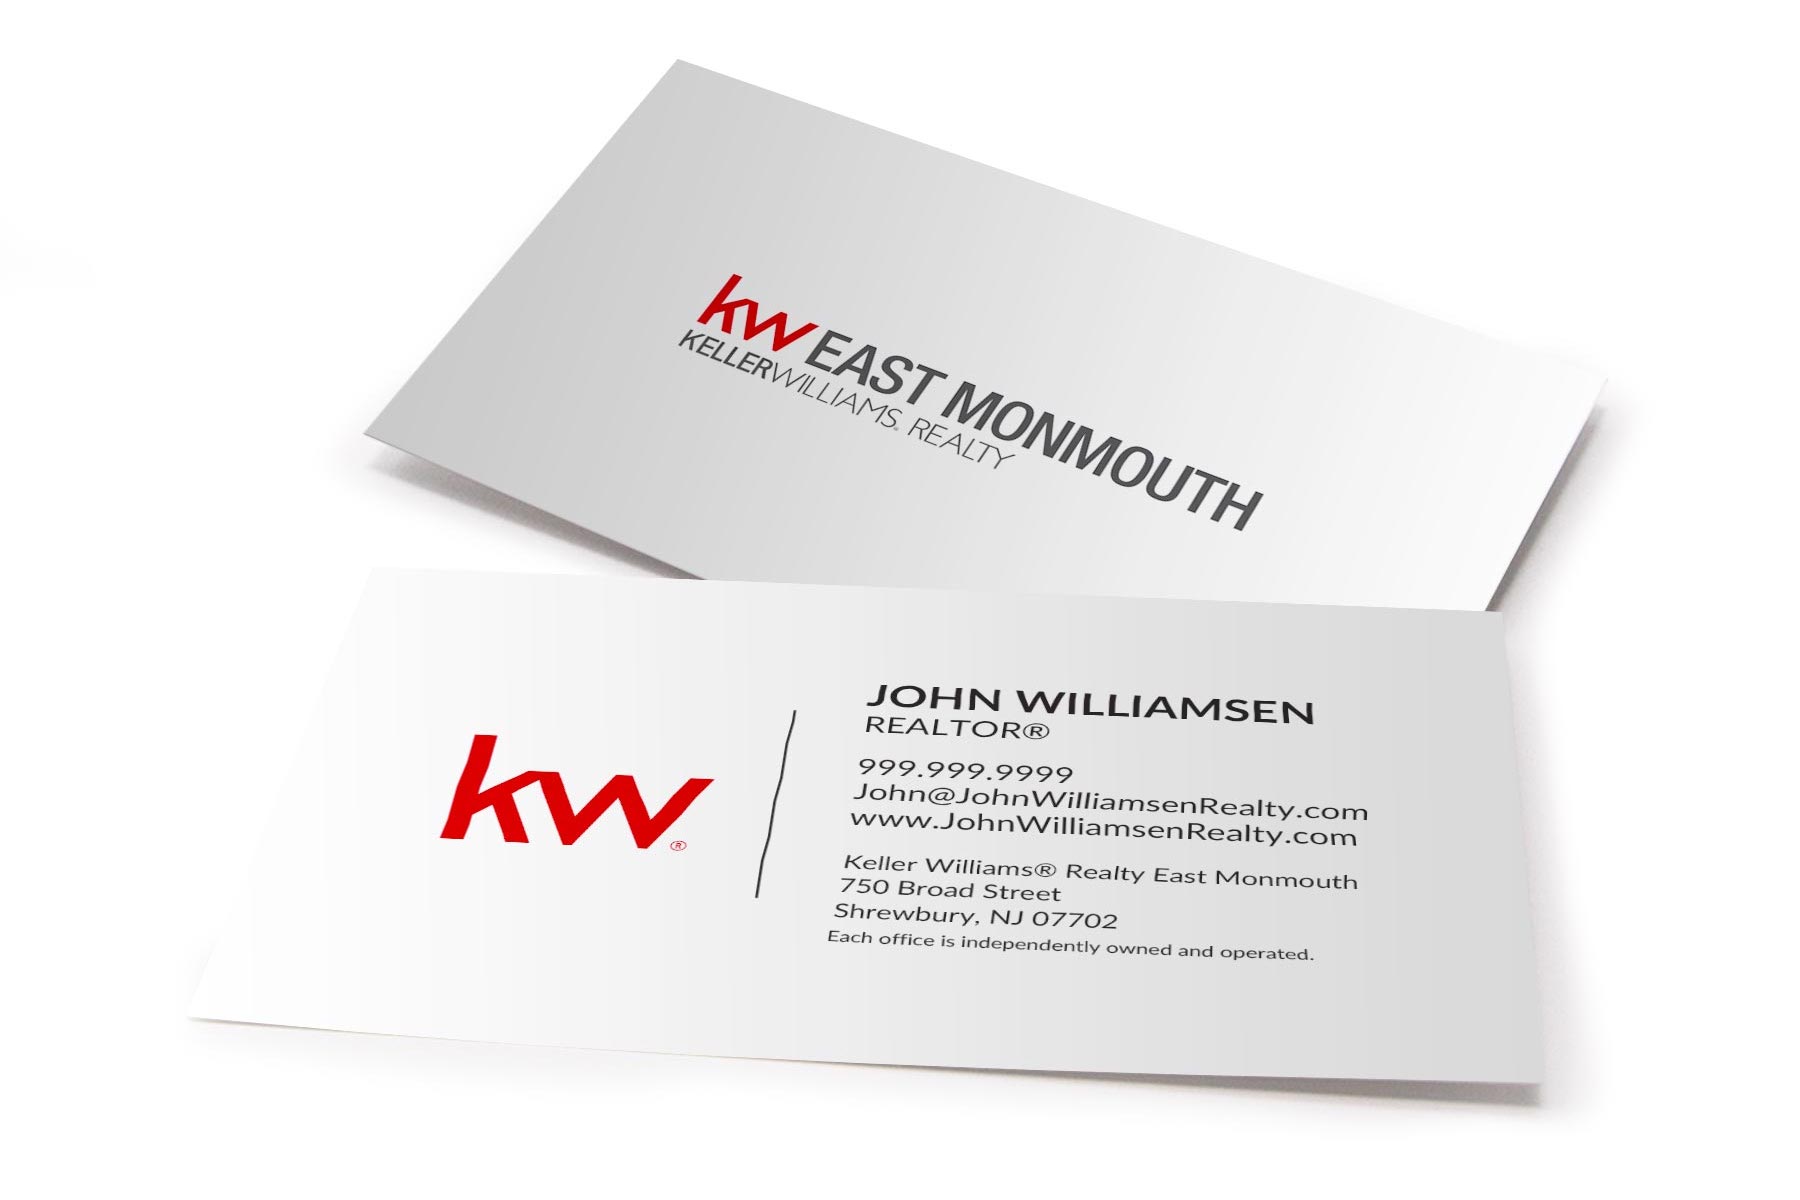 kw business cards 1